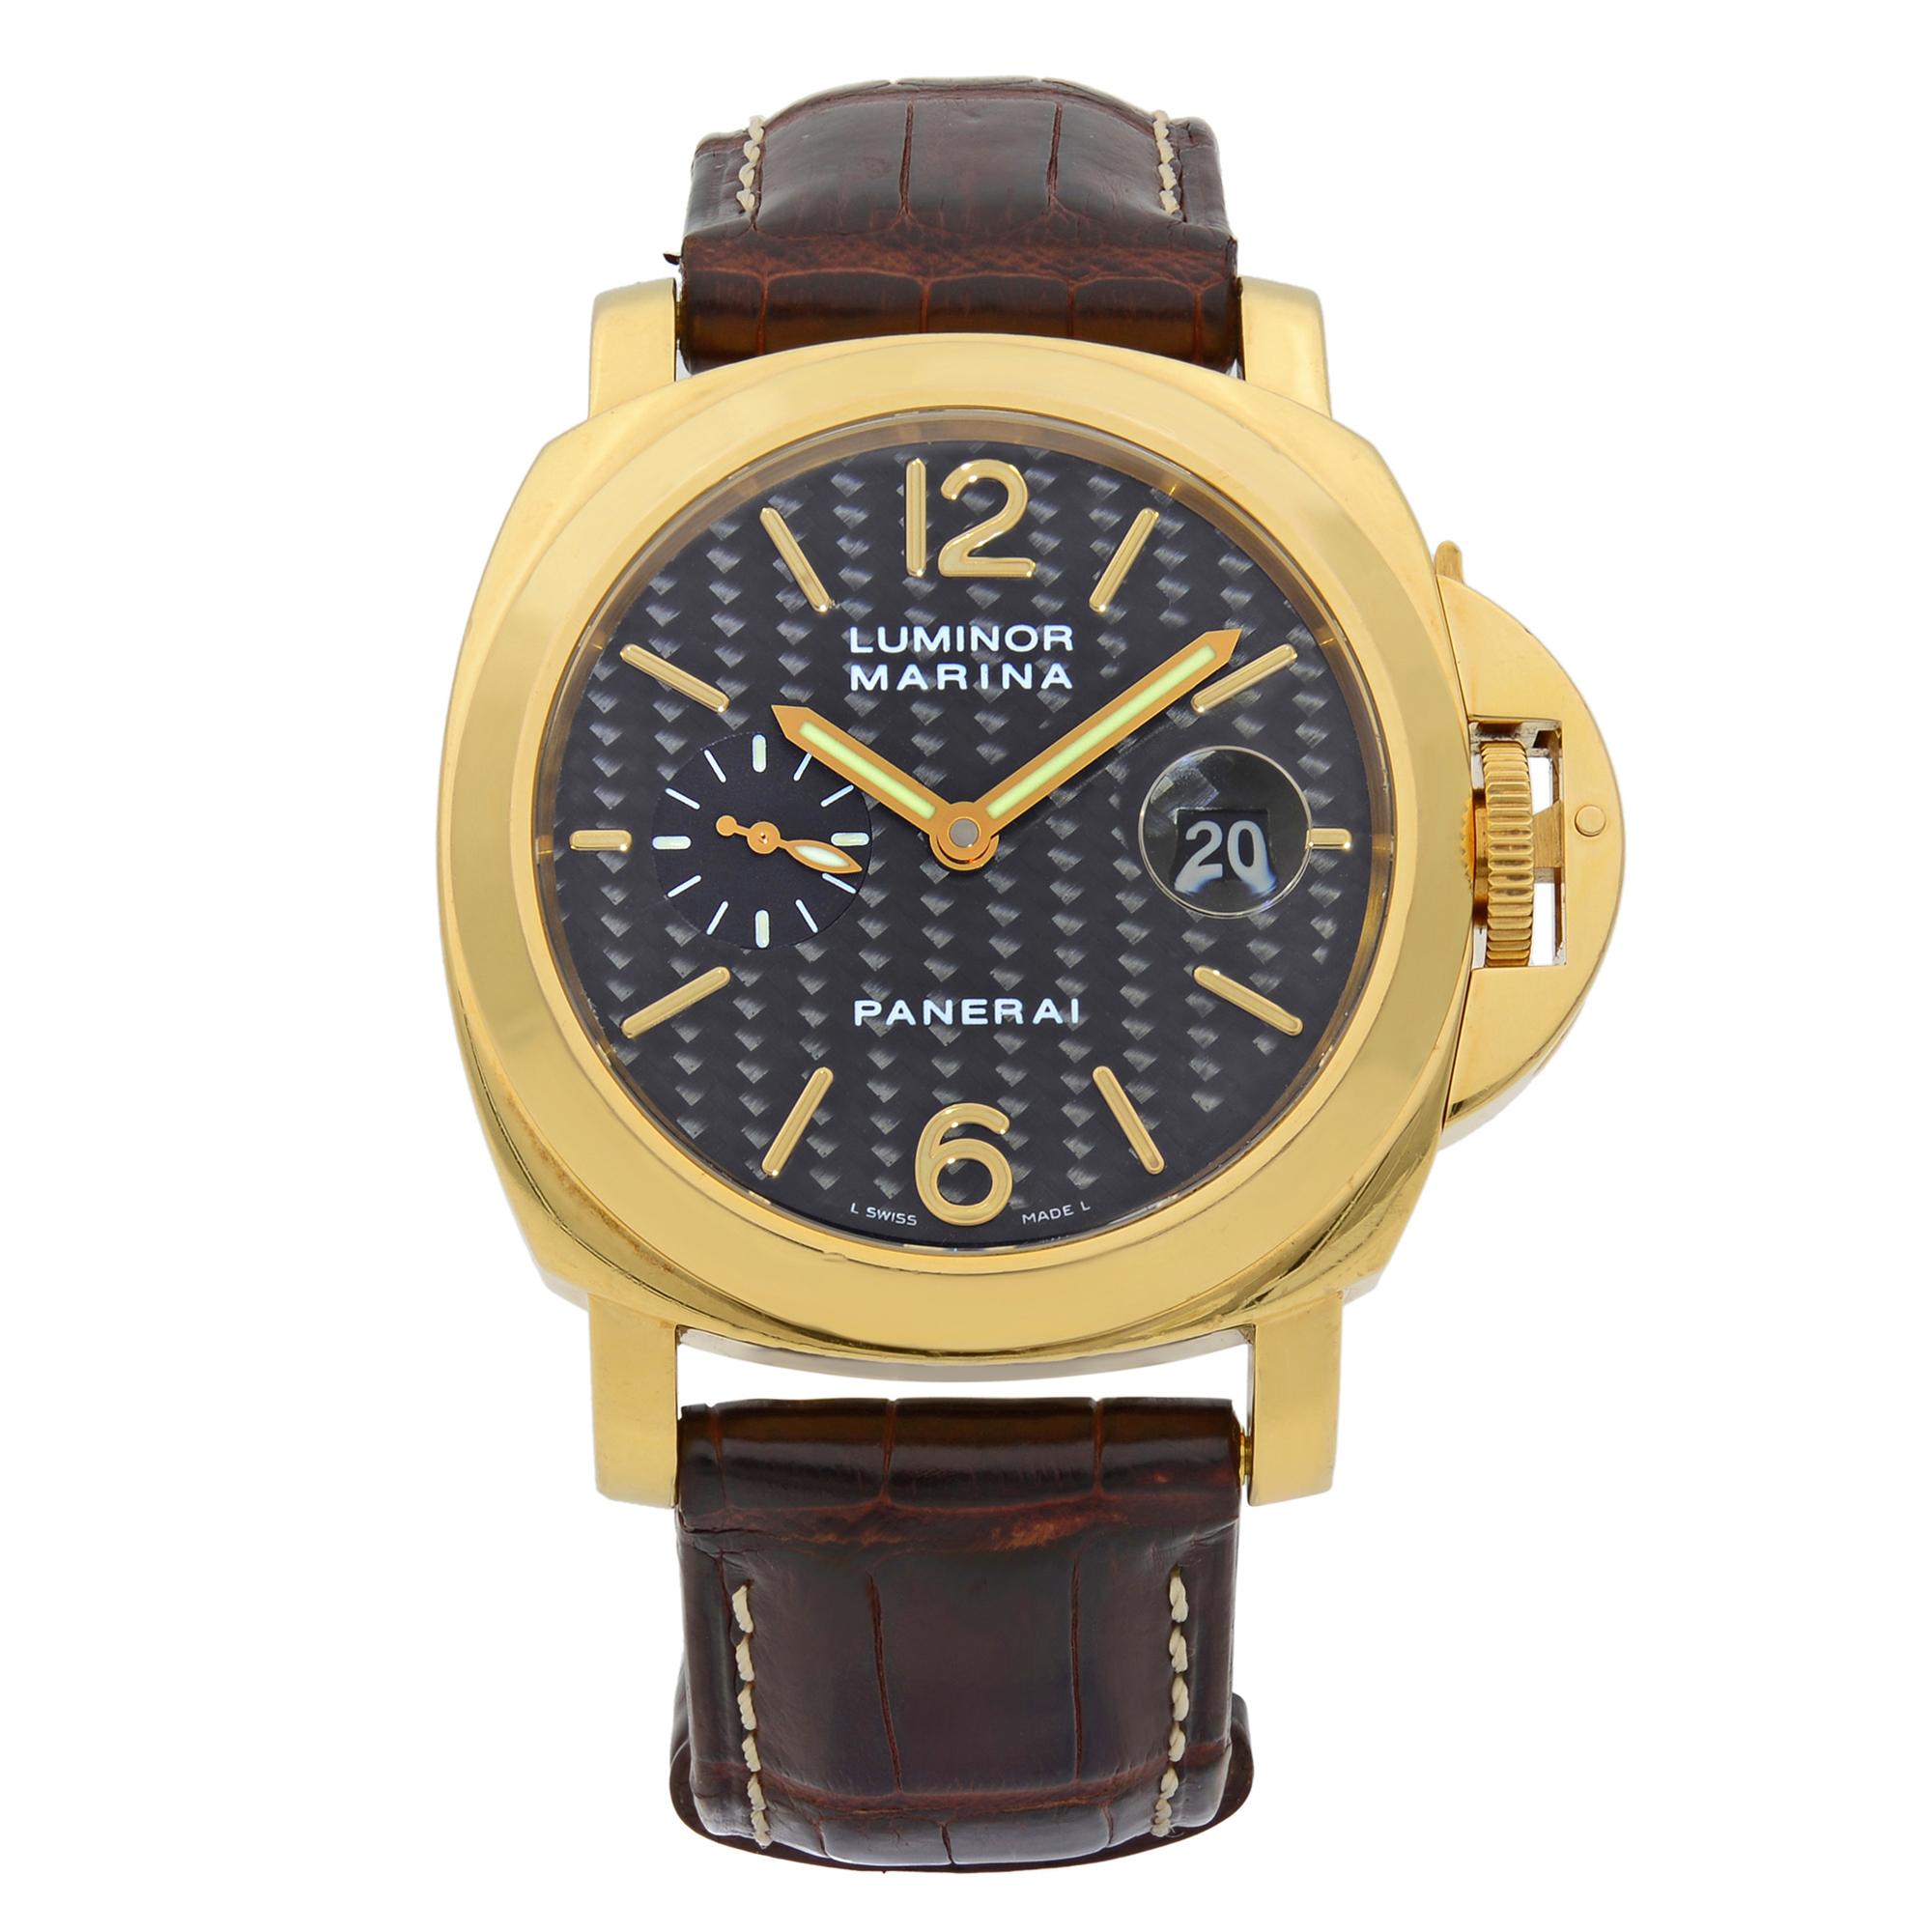 This pre-owned Panerai Luminor PAM00140 is a beautiful men's timepiece that is powered by mechanical (automatic) movement which is cased in a yellow gold case. It has a round shape face, date indicator, small seconds subdial dial and has hand sticks